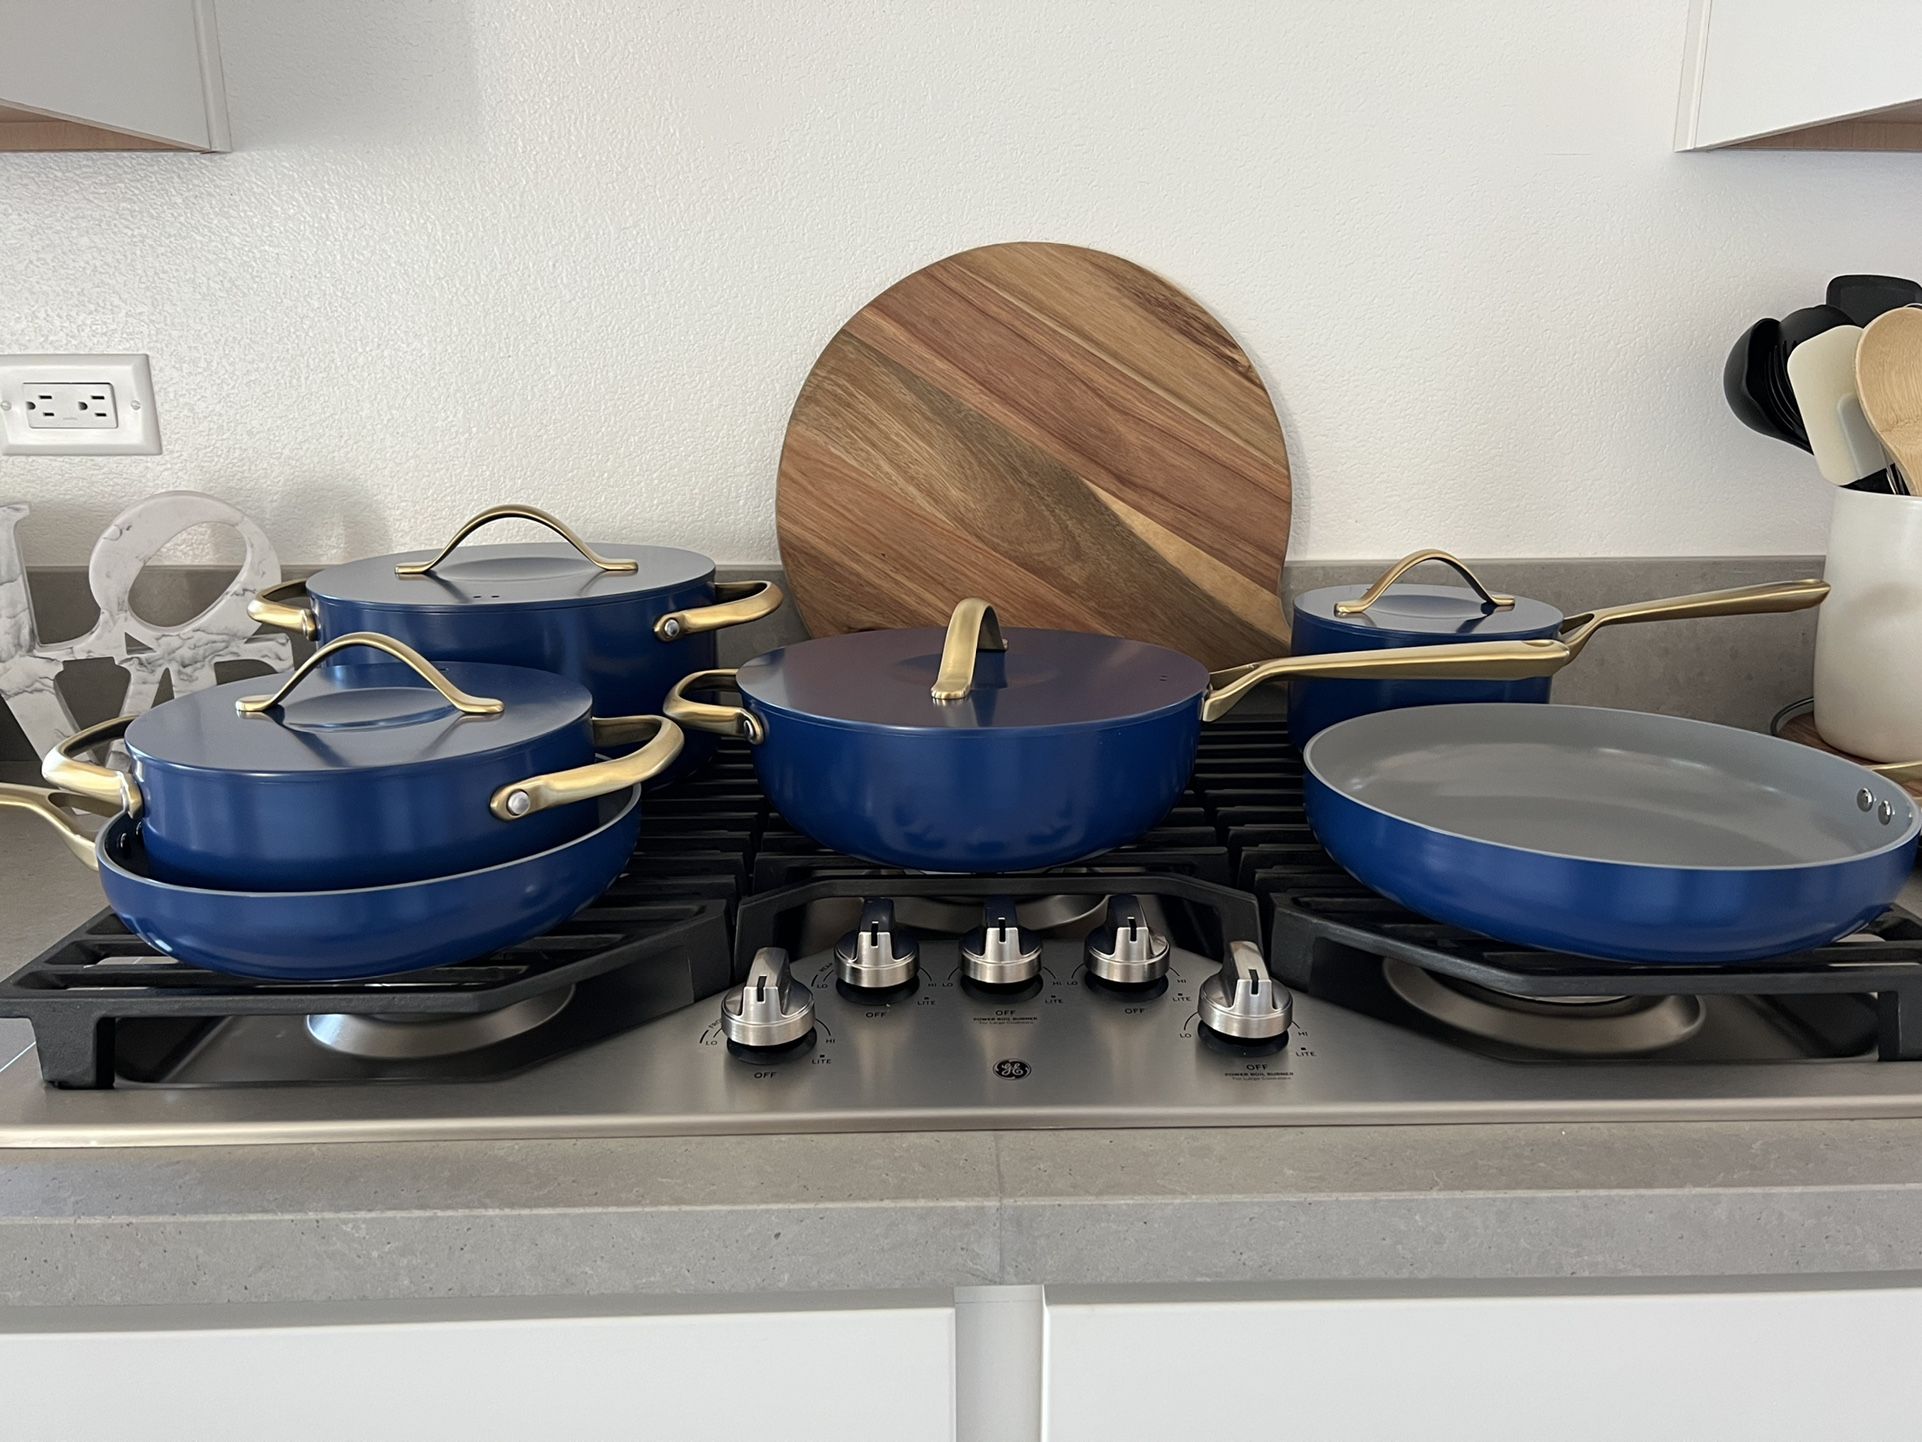 Members Mark 11 pc Ceramic Cookware Set (Blue & Gold) for Sale in